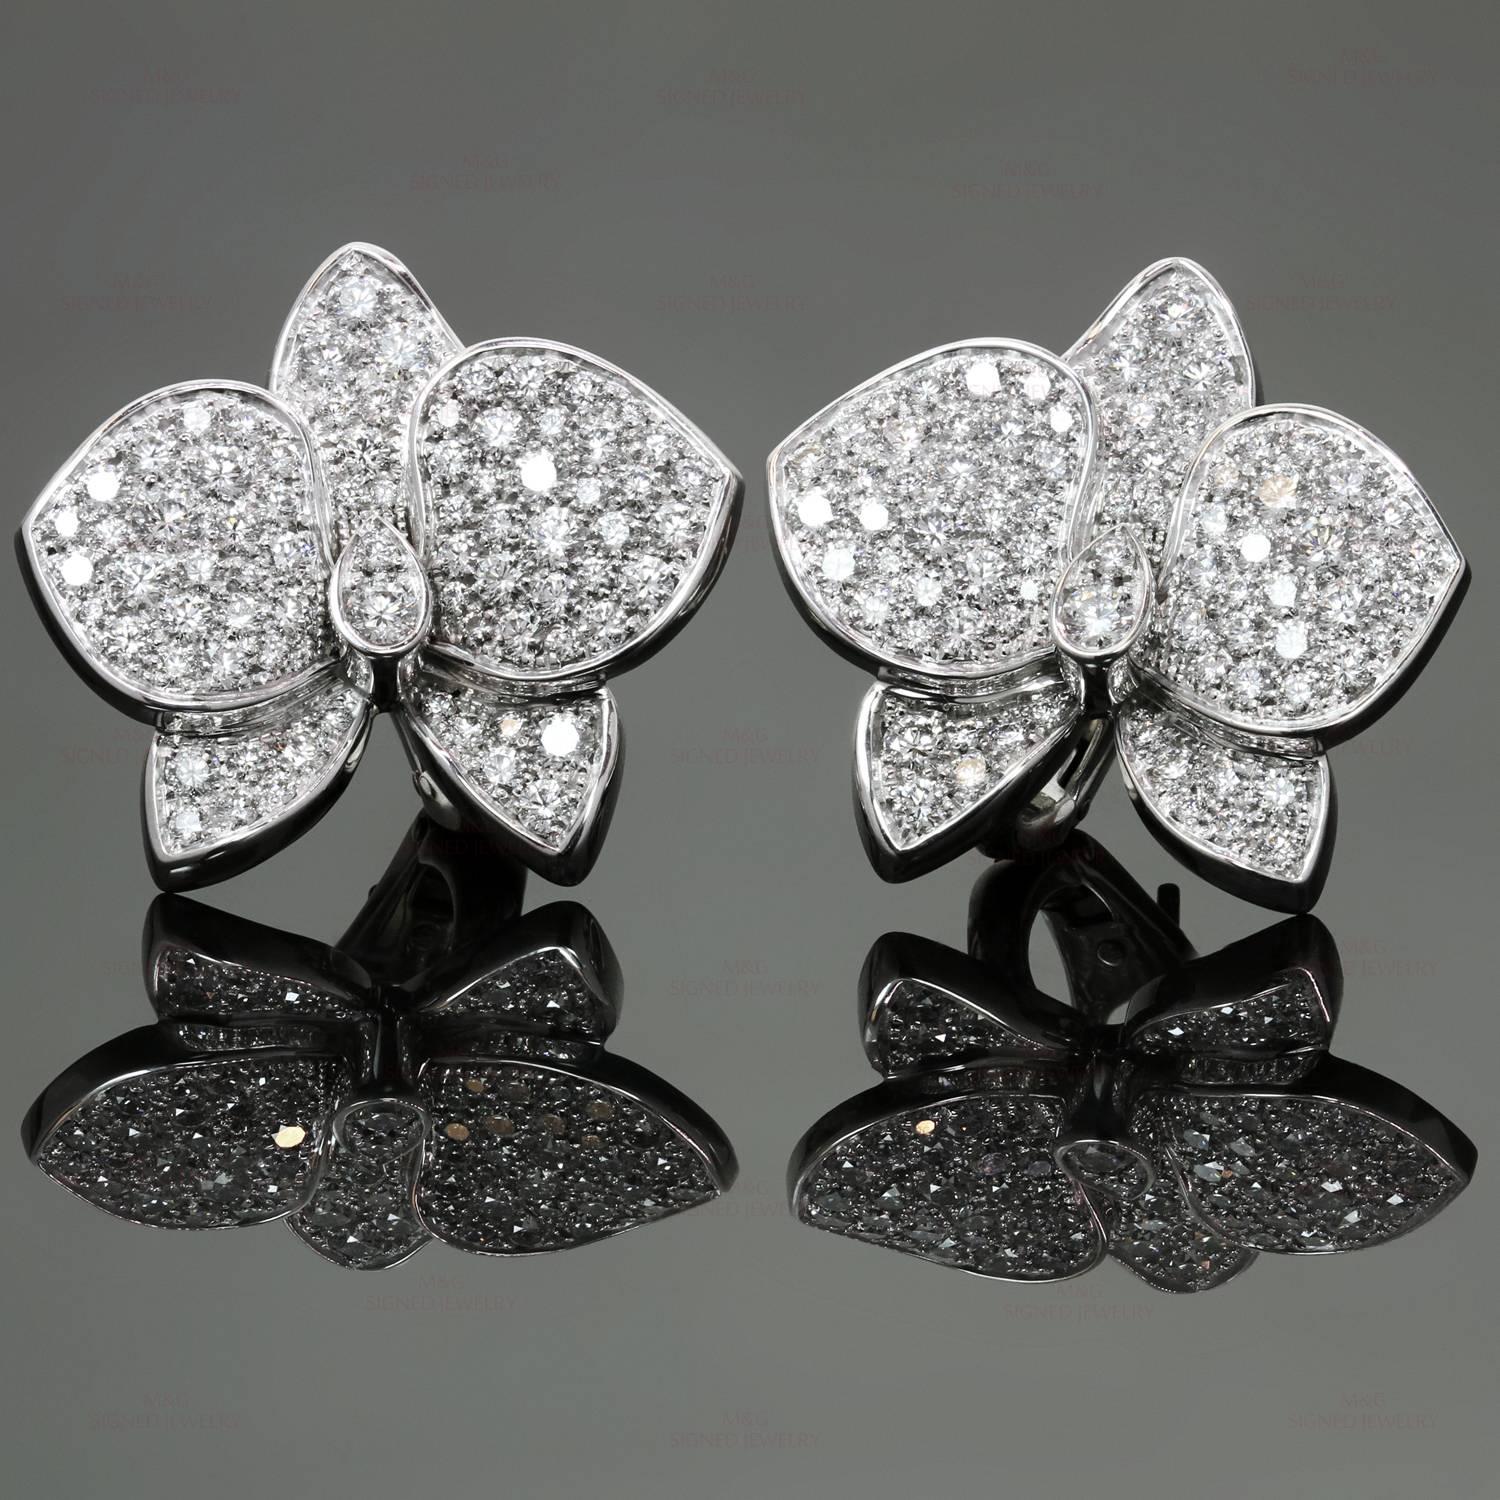 These exquisite earrings from Cartier's Caresse D'orchidees collection feature a delicate flower design crafted in 18k white gold and pave set with brilliant-cut round diamonds of an estimated 2.90 carats. Made in France circa 2000s. Measurements: